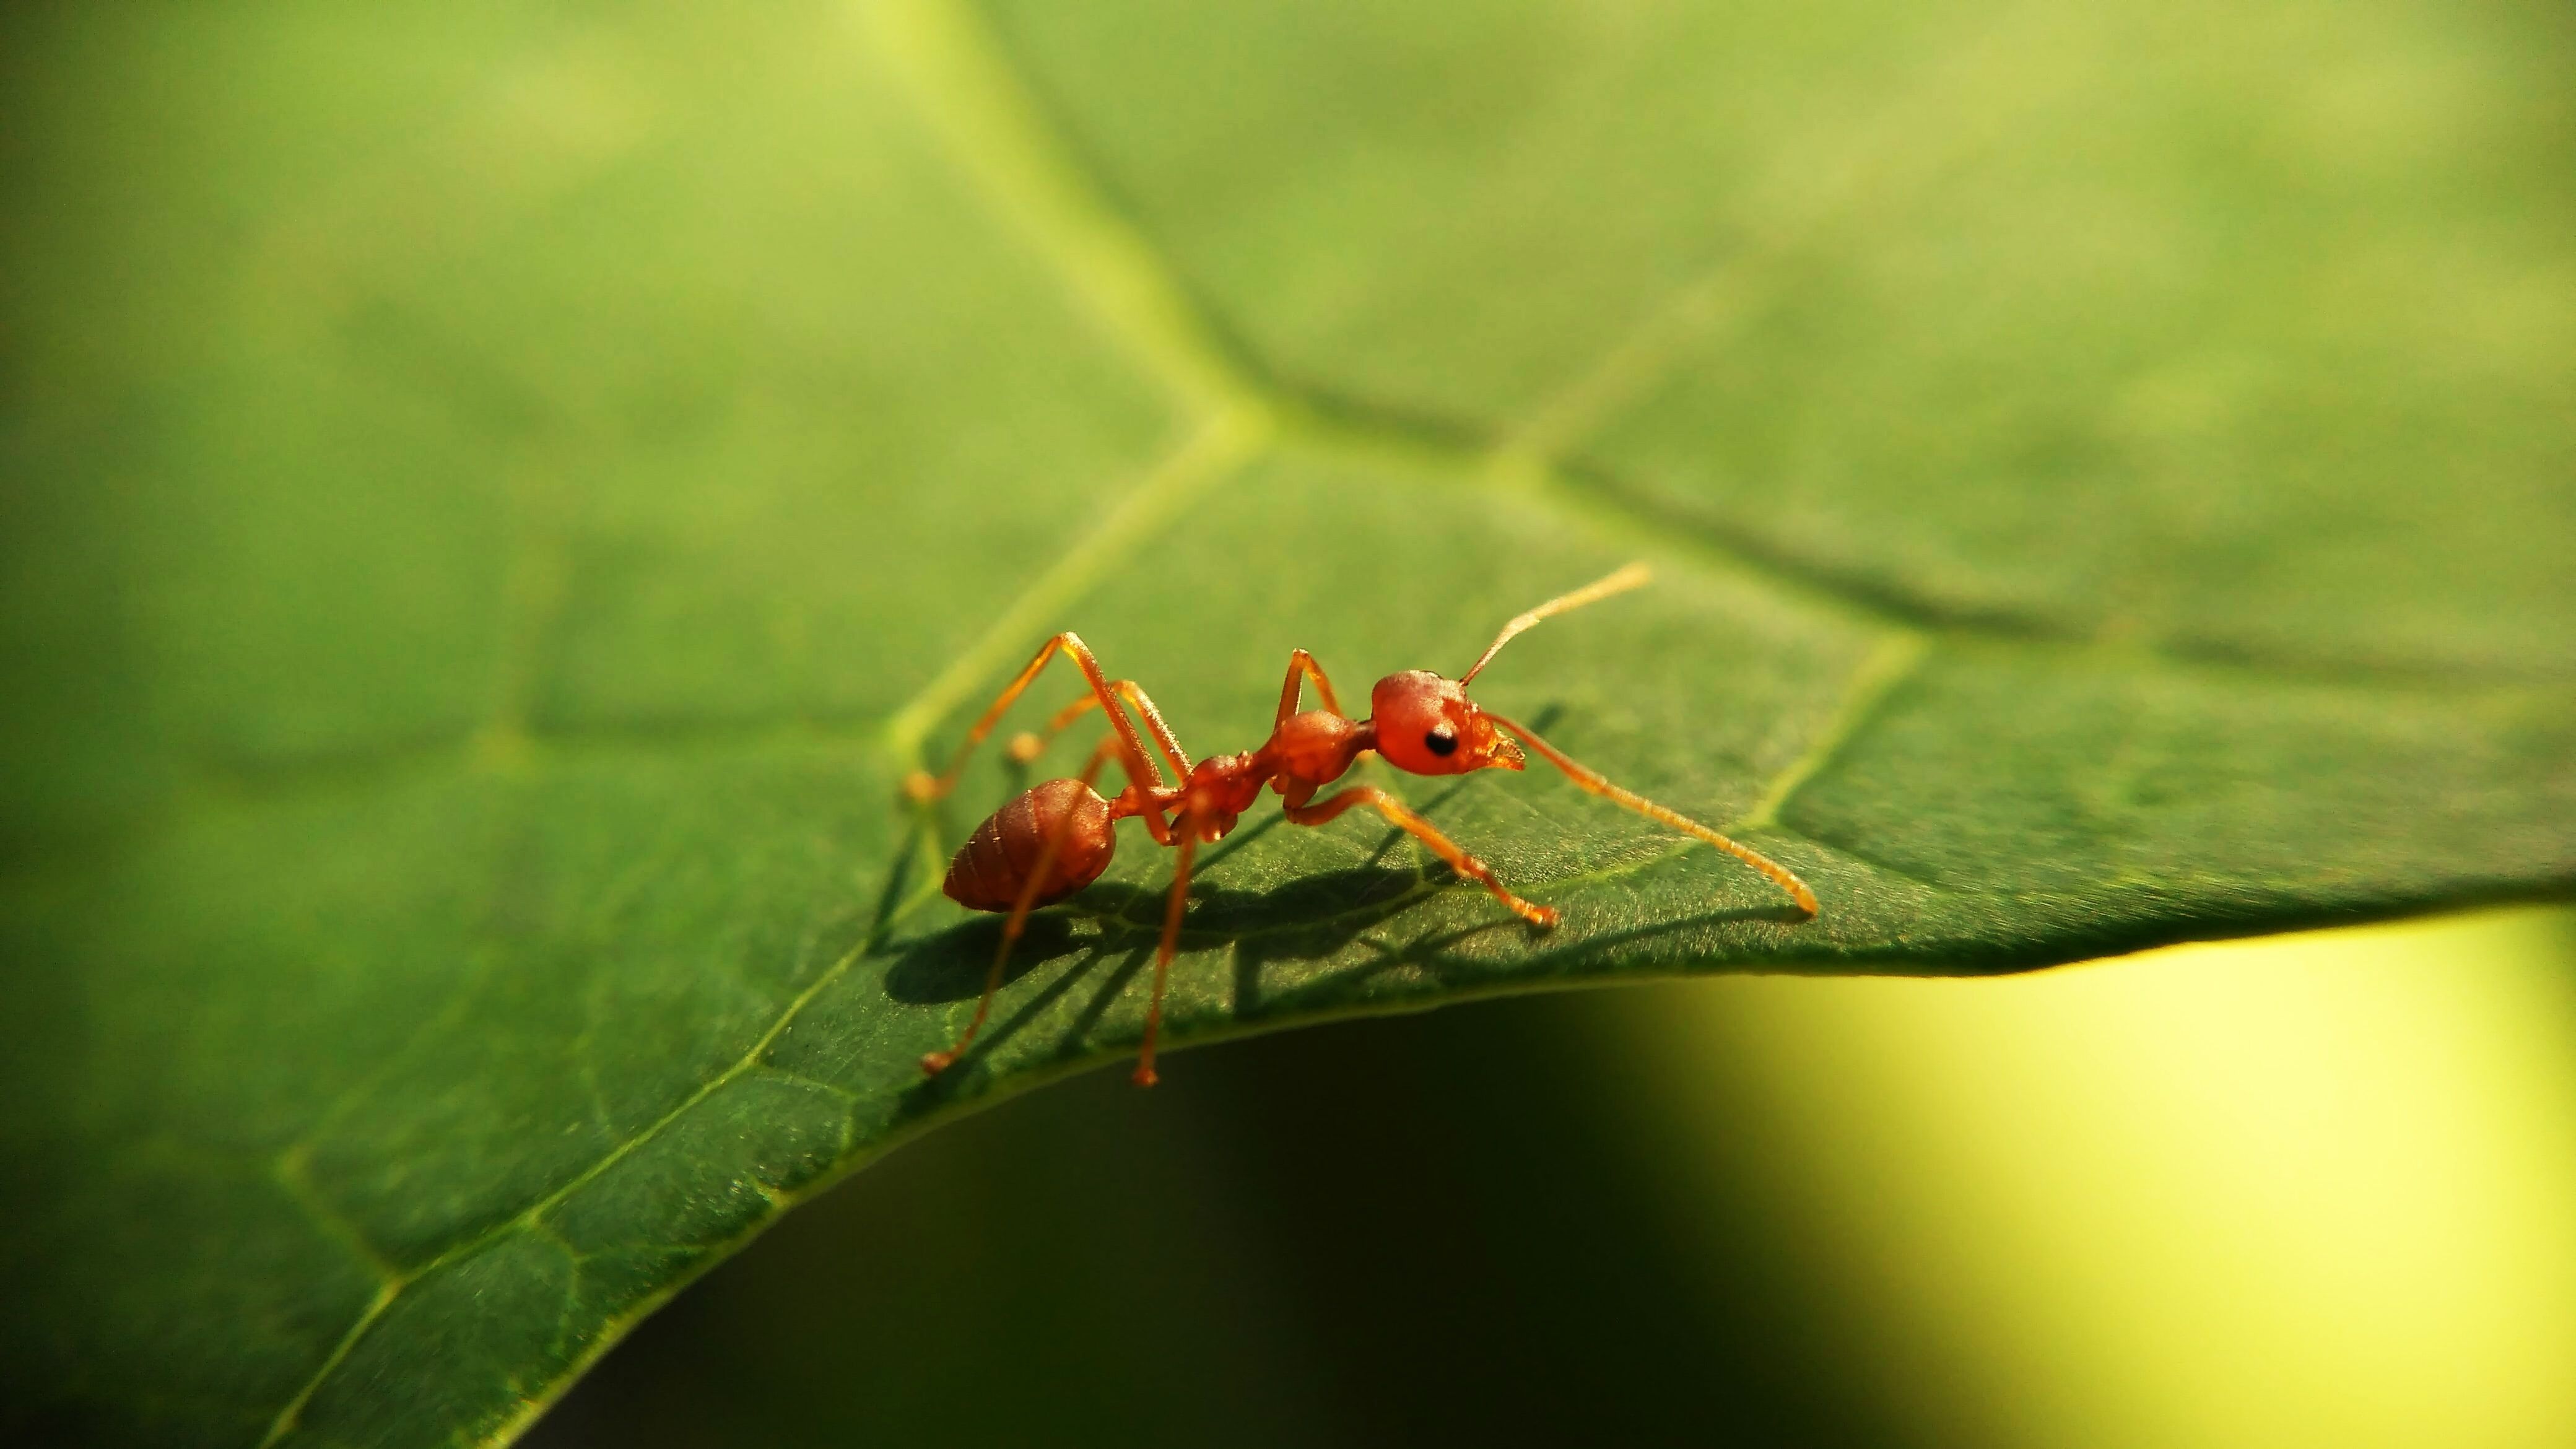 Ant Bites Symptoms, Prevention, and Treatment, According to Experts